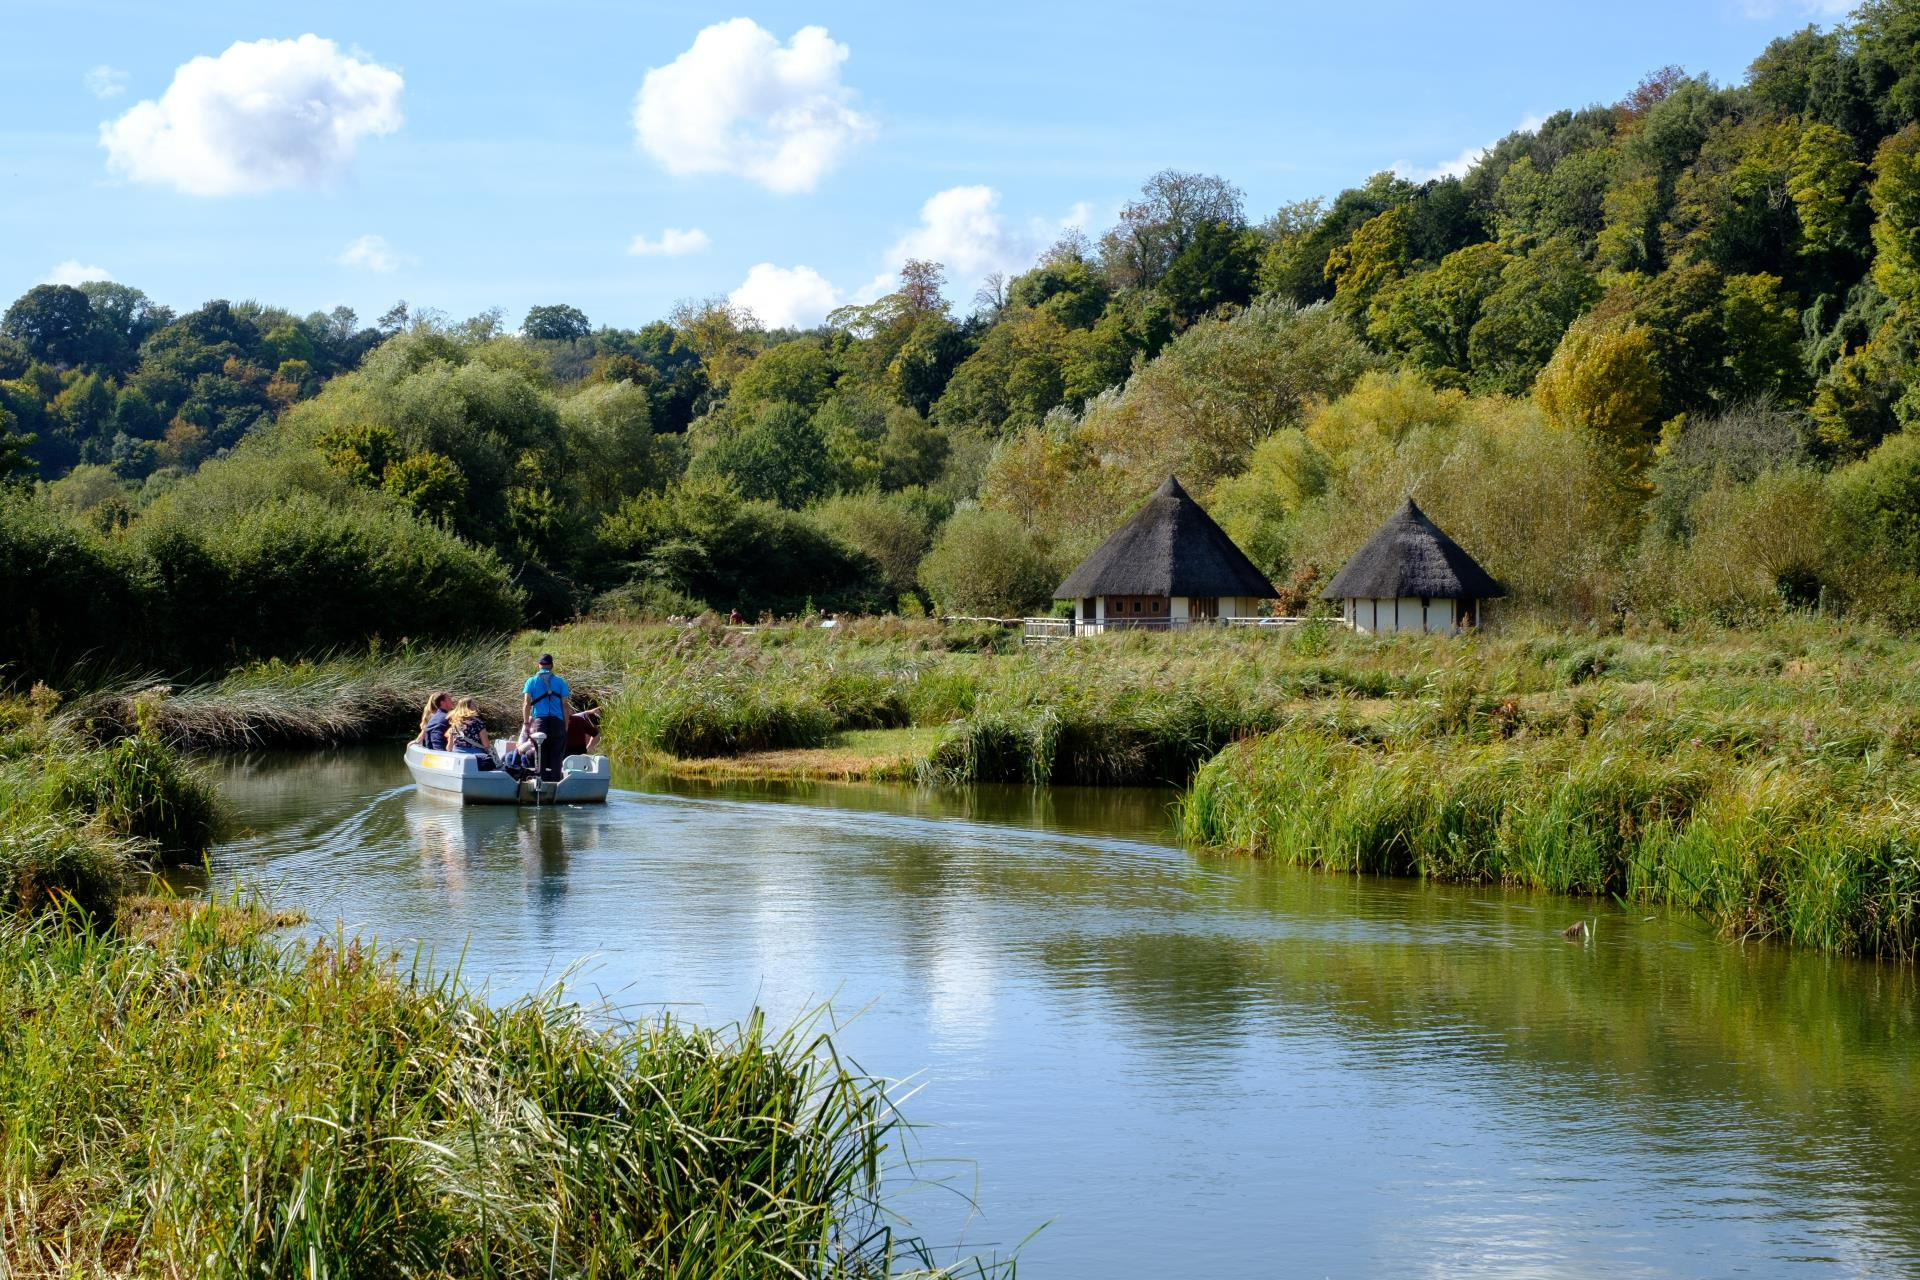 Kingfisher? Water vole? Dragonfly? What will you spot on the guided Wetlands Discovery Boat safari? Includes gorgeous views of the South Downs and majestic Offham Hanger. Boats can accommodate manual two wheelchairs.